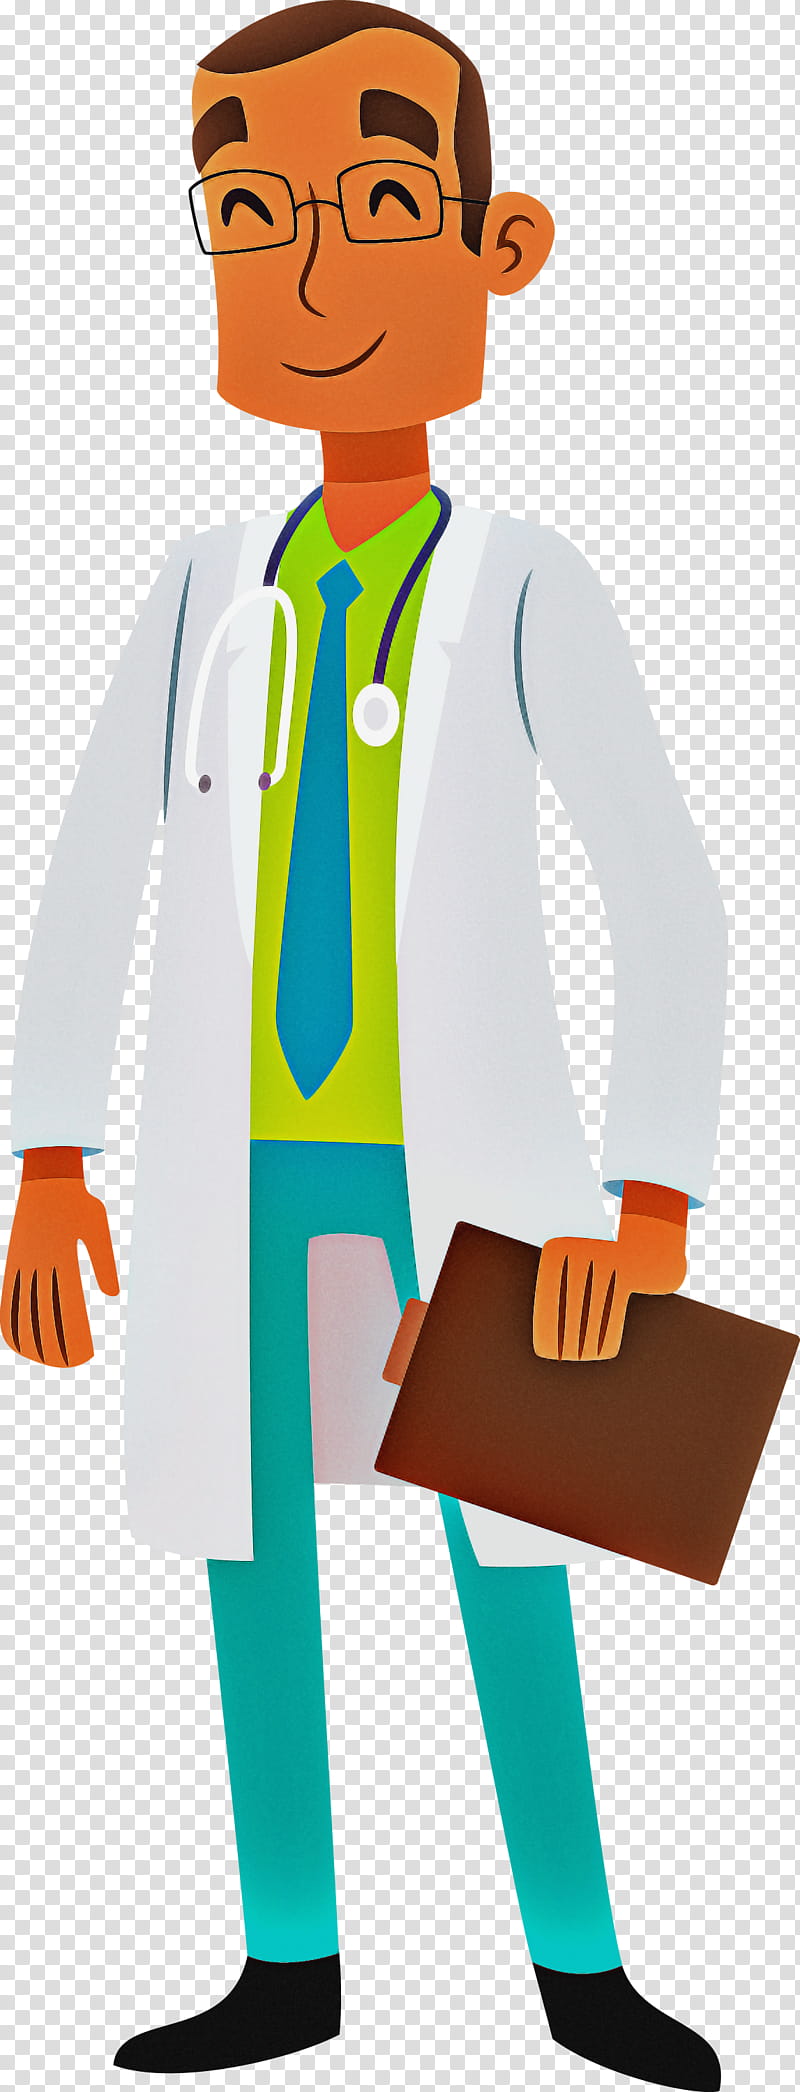 health behavior physician planning psychology, Doctor Cartoon, Surgery, Medicine, Health Care, Clinical Psychology, Scope, Medical Diagnosis transparent background PNG clipart